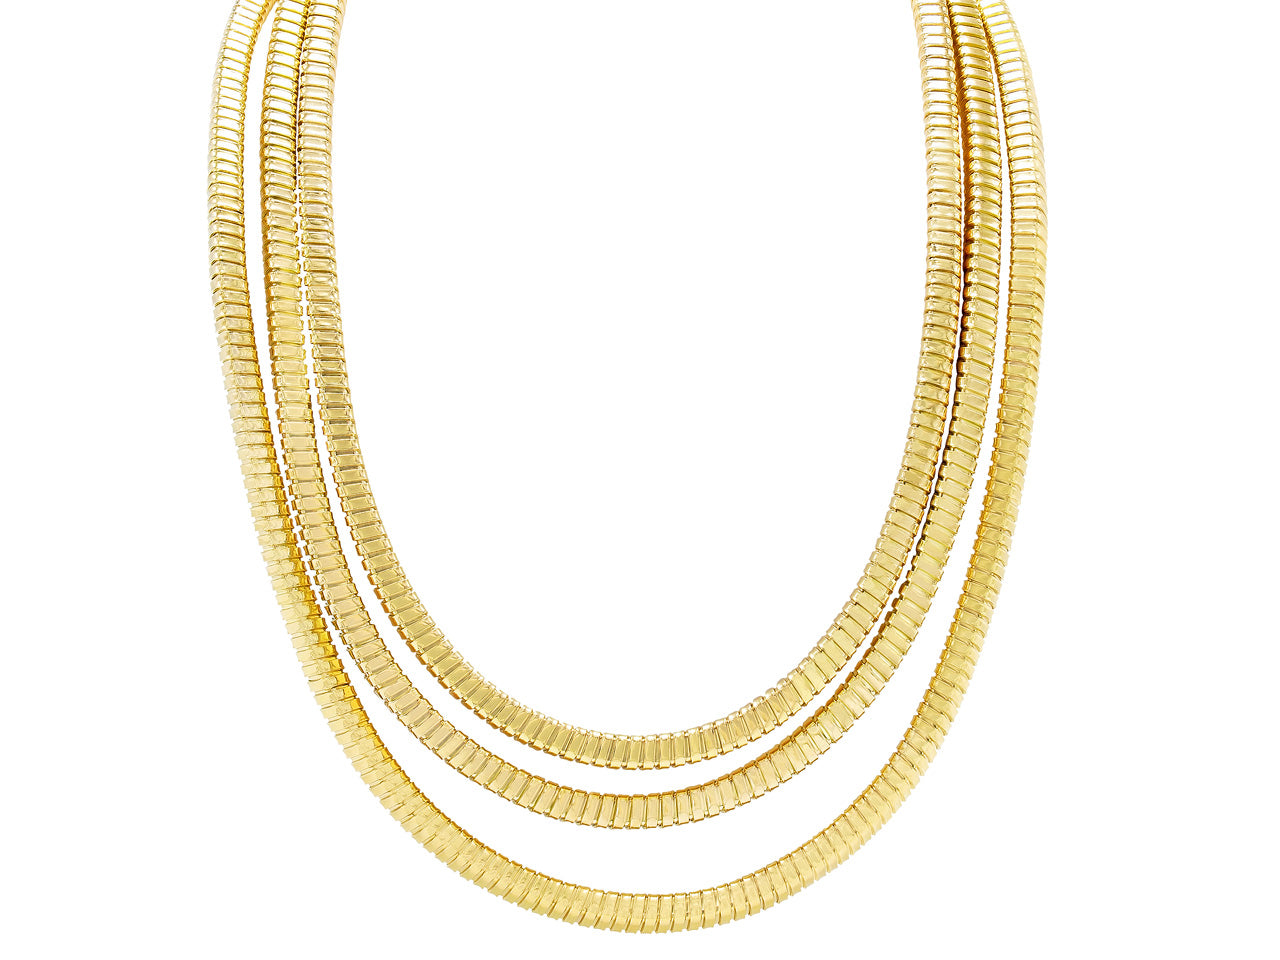 'Duemetri' Tubogas Necklace in 18K Gold, by Beladora